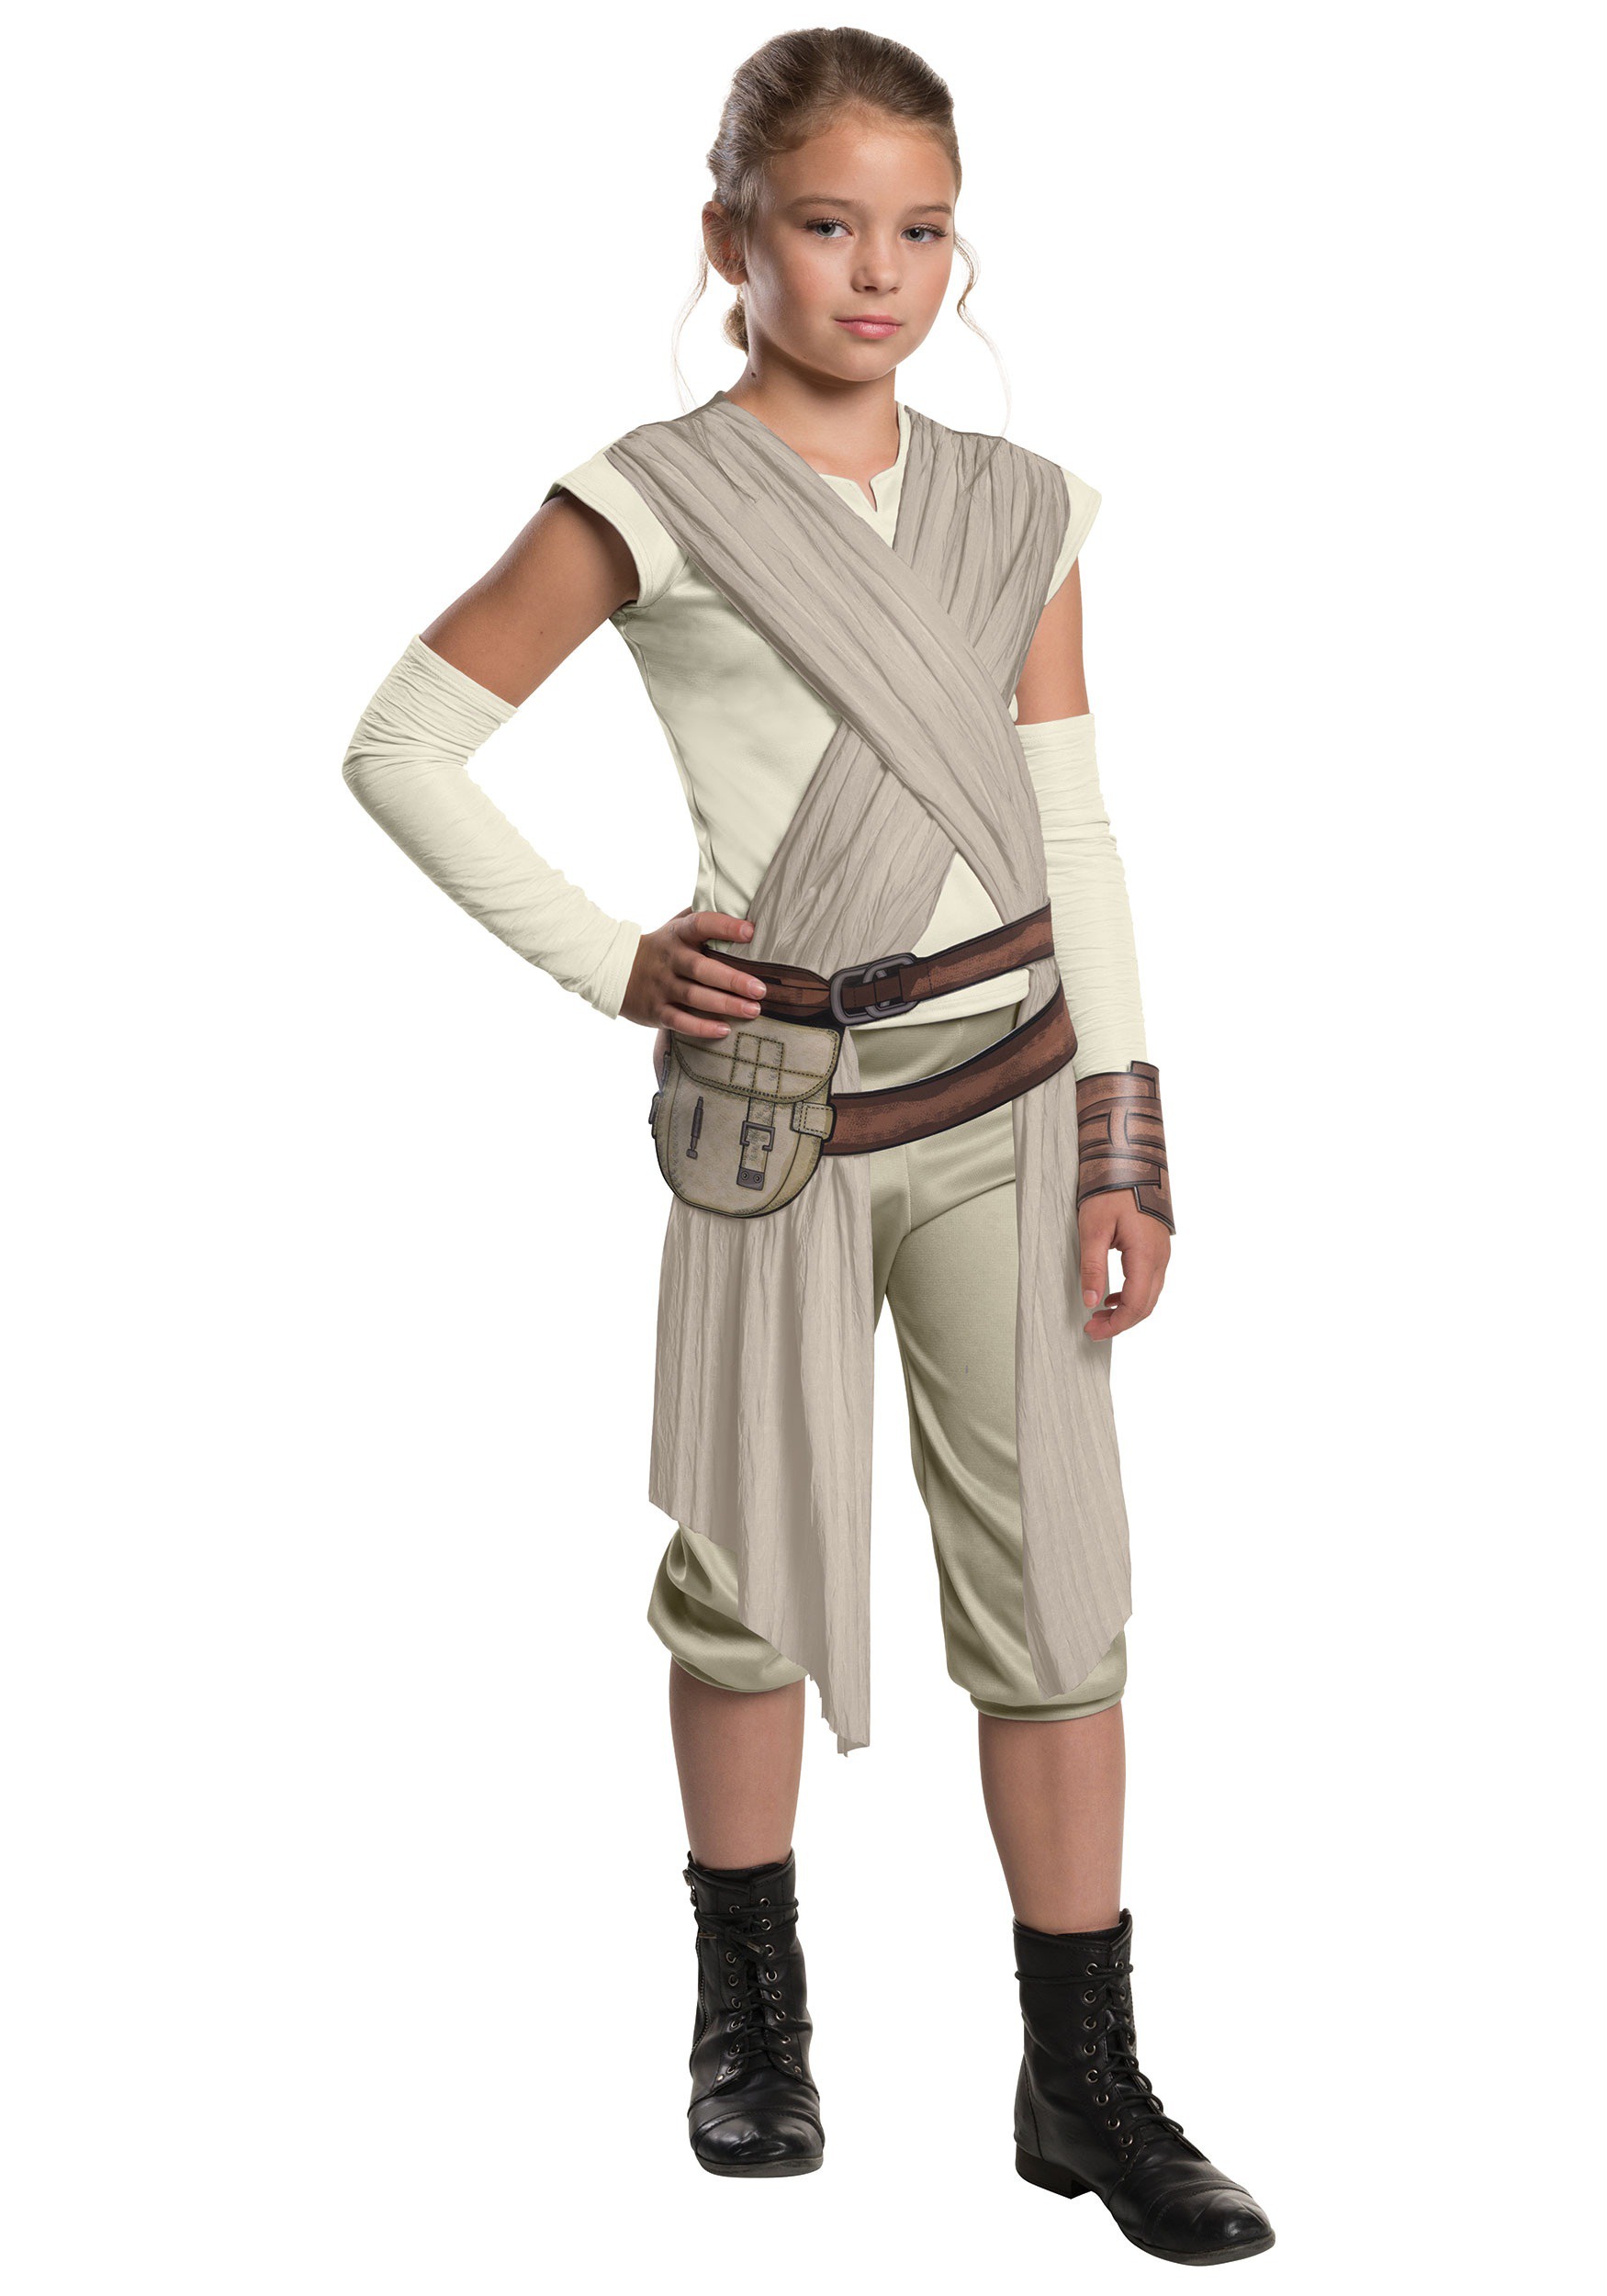 Image of Child Deluxe Star Wars The Force Awakens Rey Costume ID RU620090-S